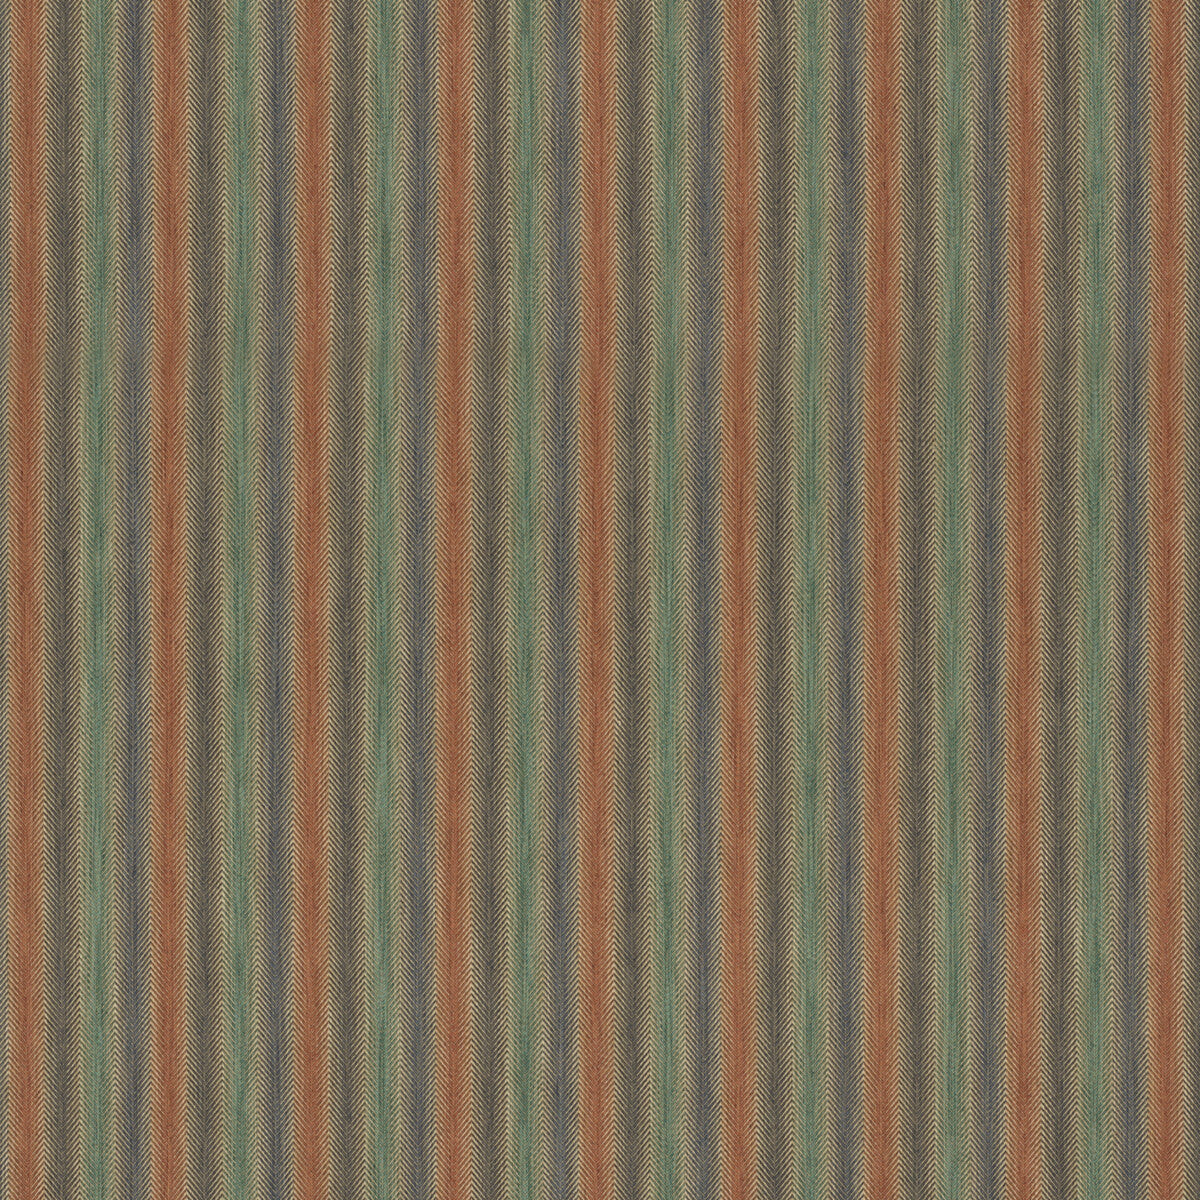 Shepton Stripe fabric in teal/spice color - pattern FD811.R50.0 - by Mulberry in the Icons Fabrics collection